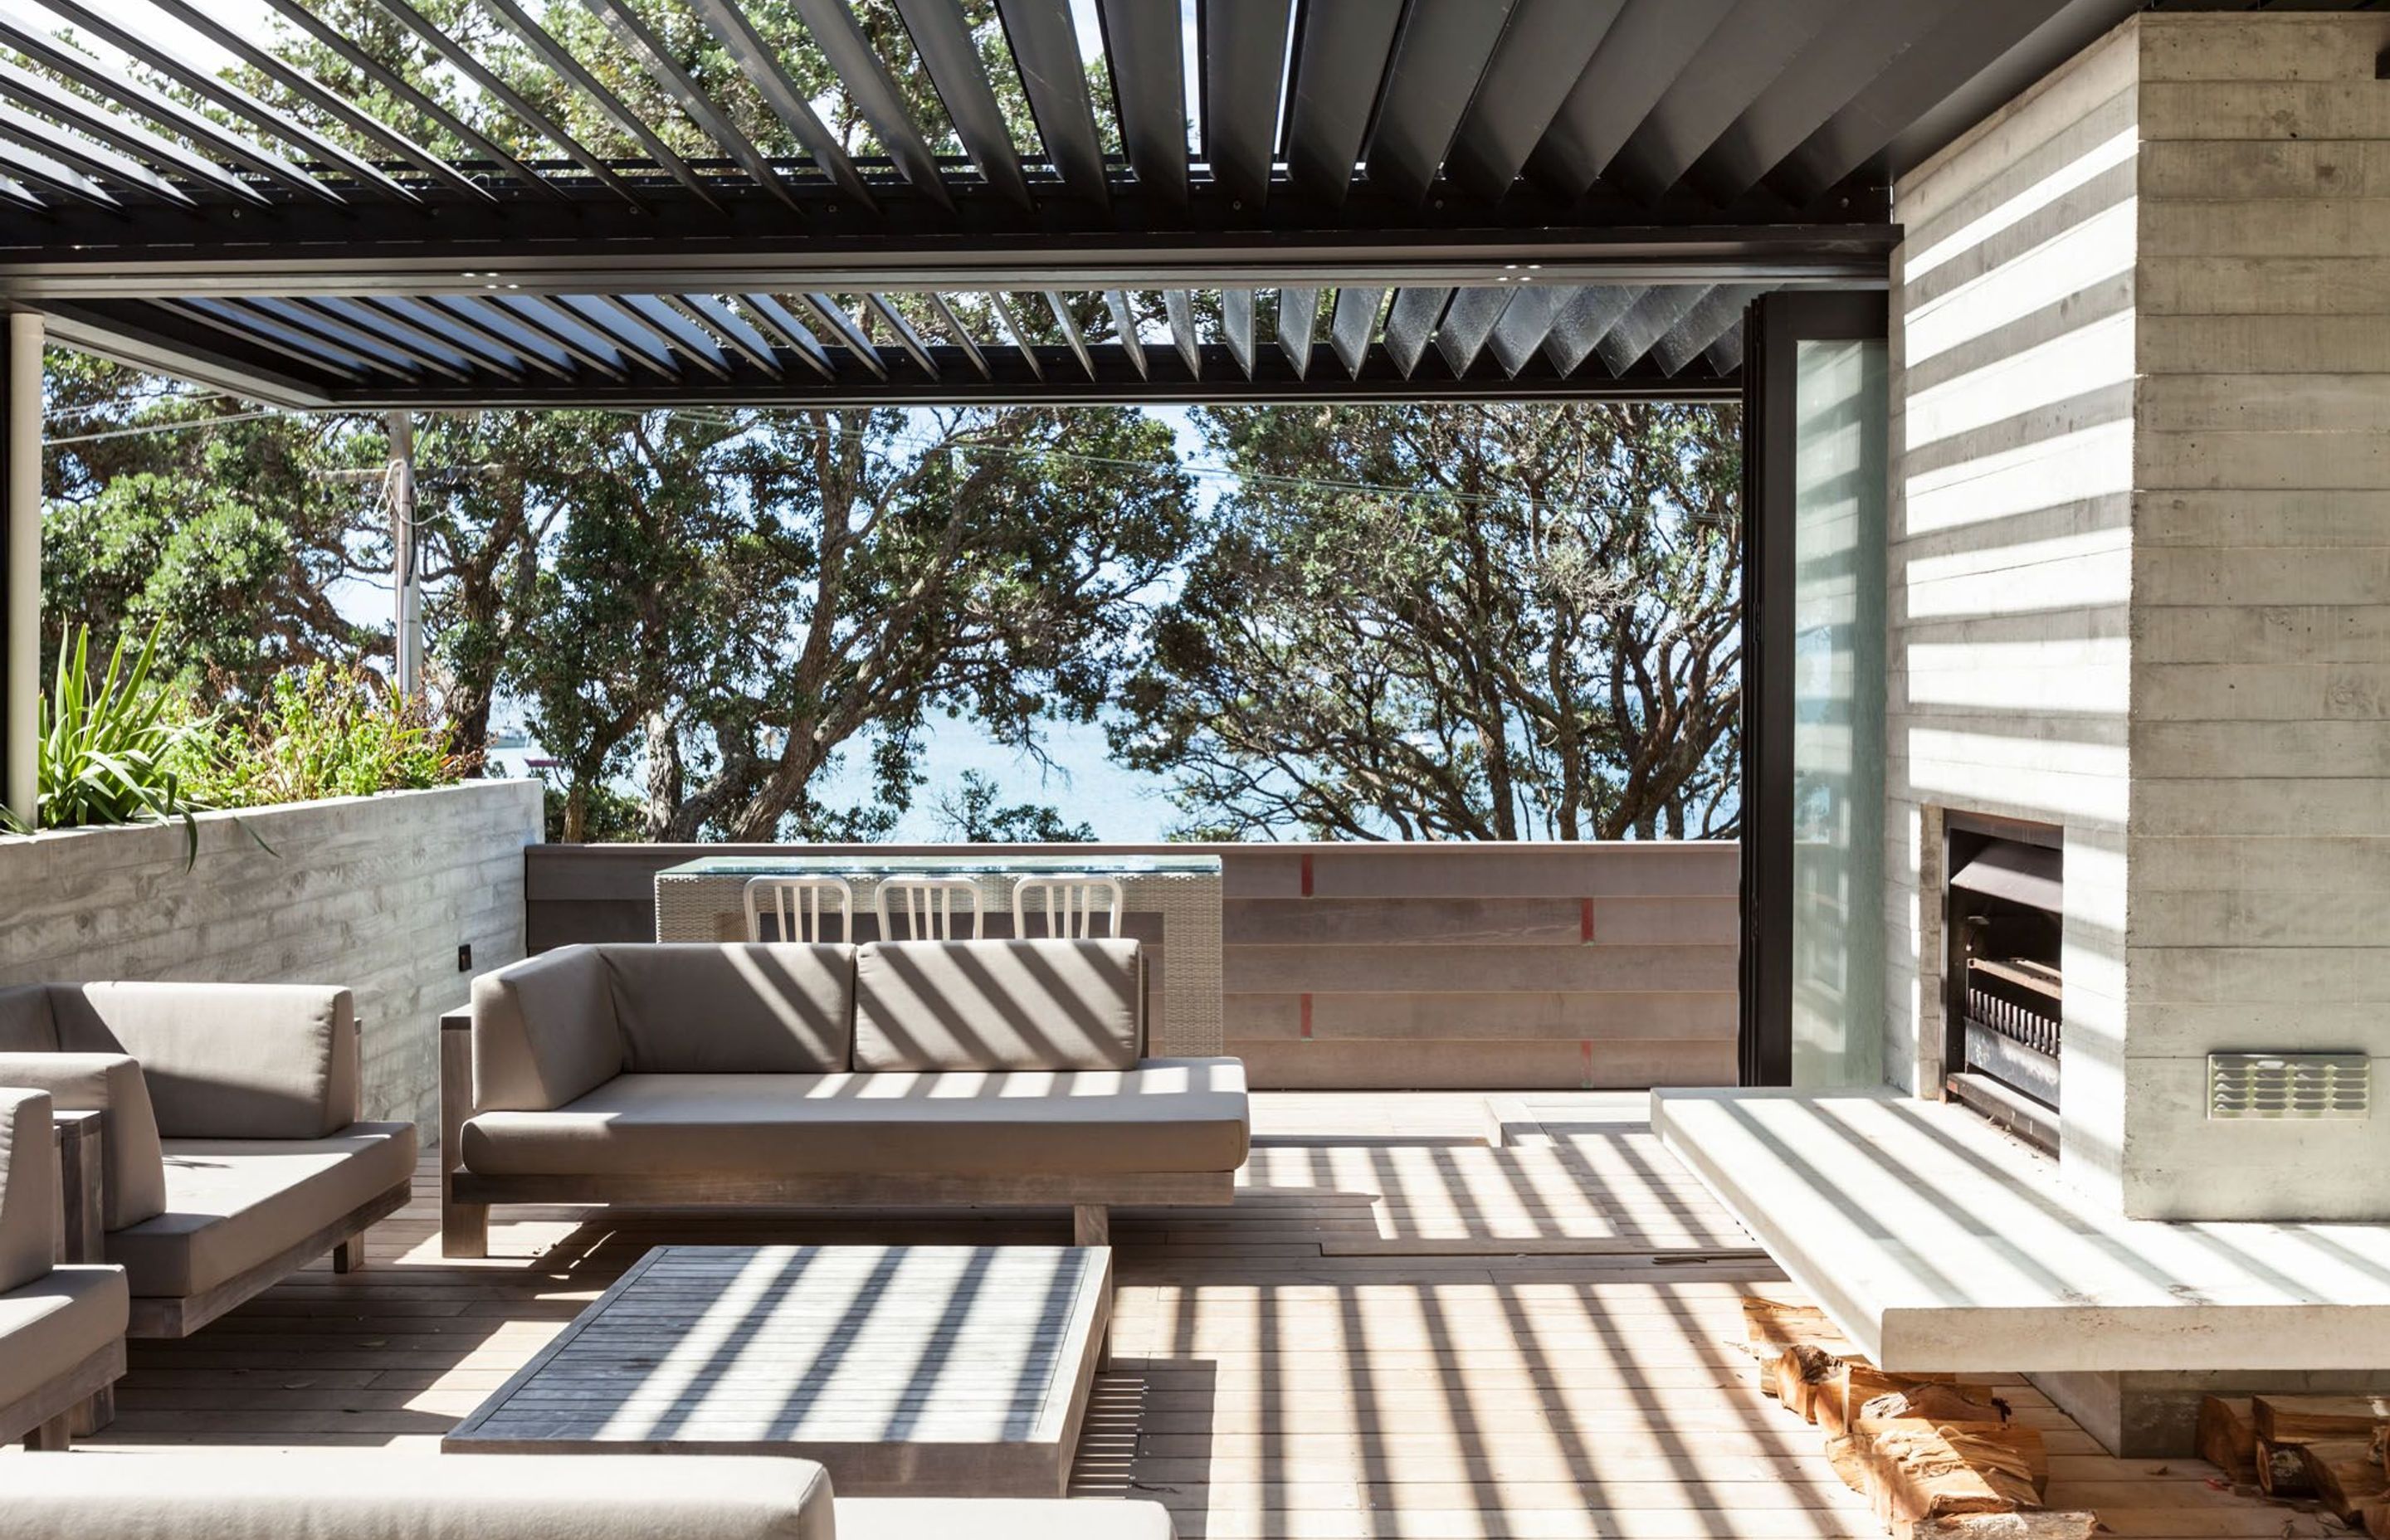 This stunning outdoor room in a Waiheke home features the motorised Locarno louvre roof system.